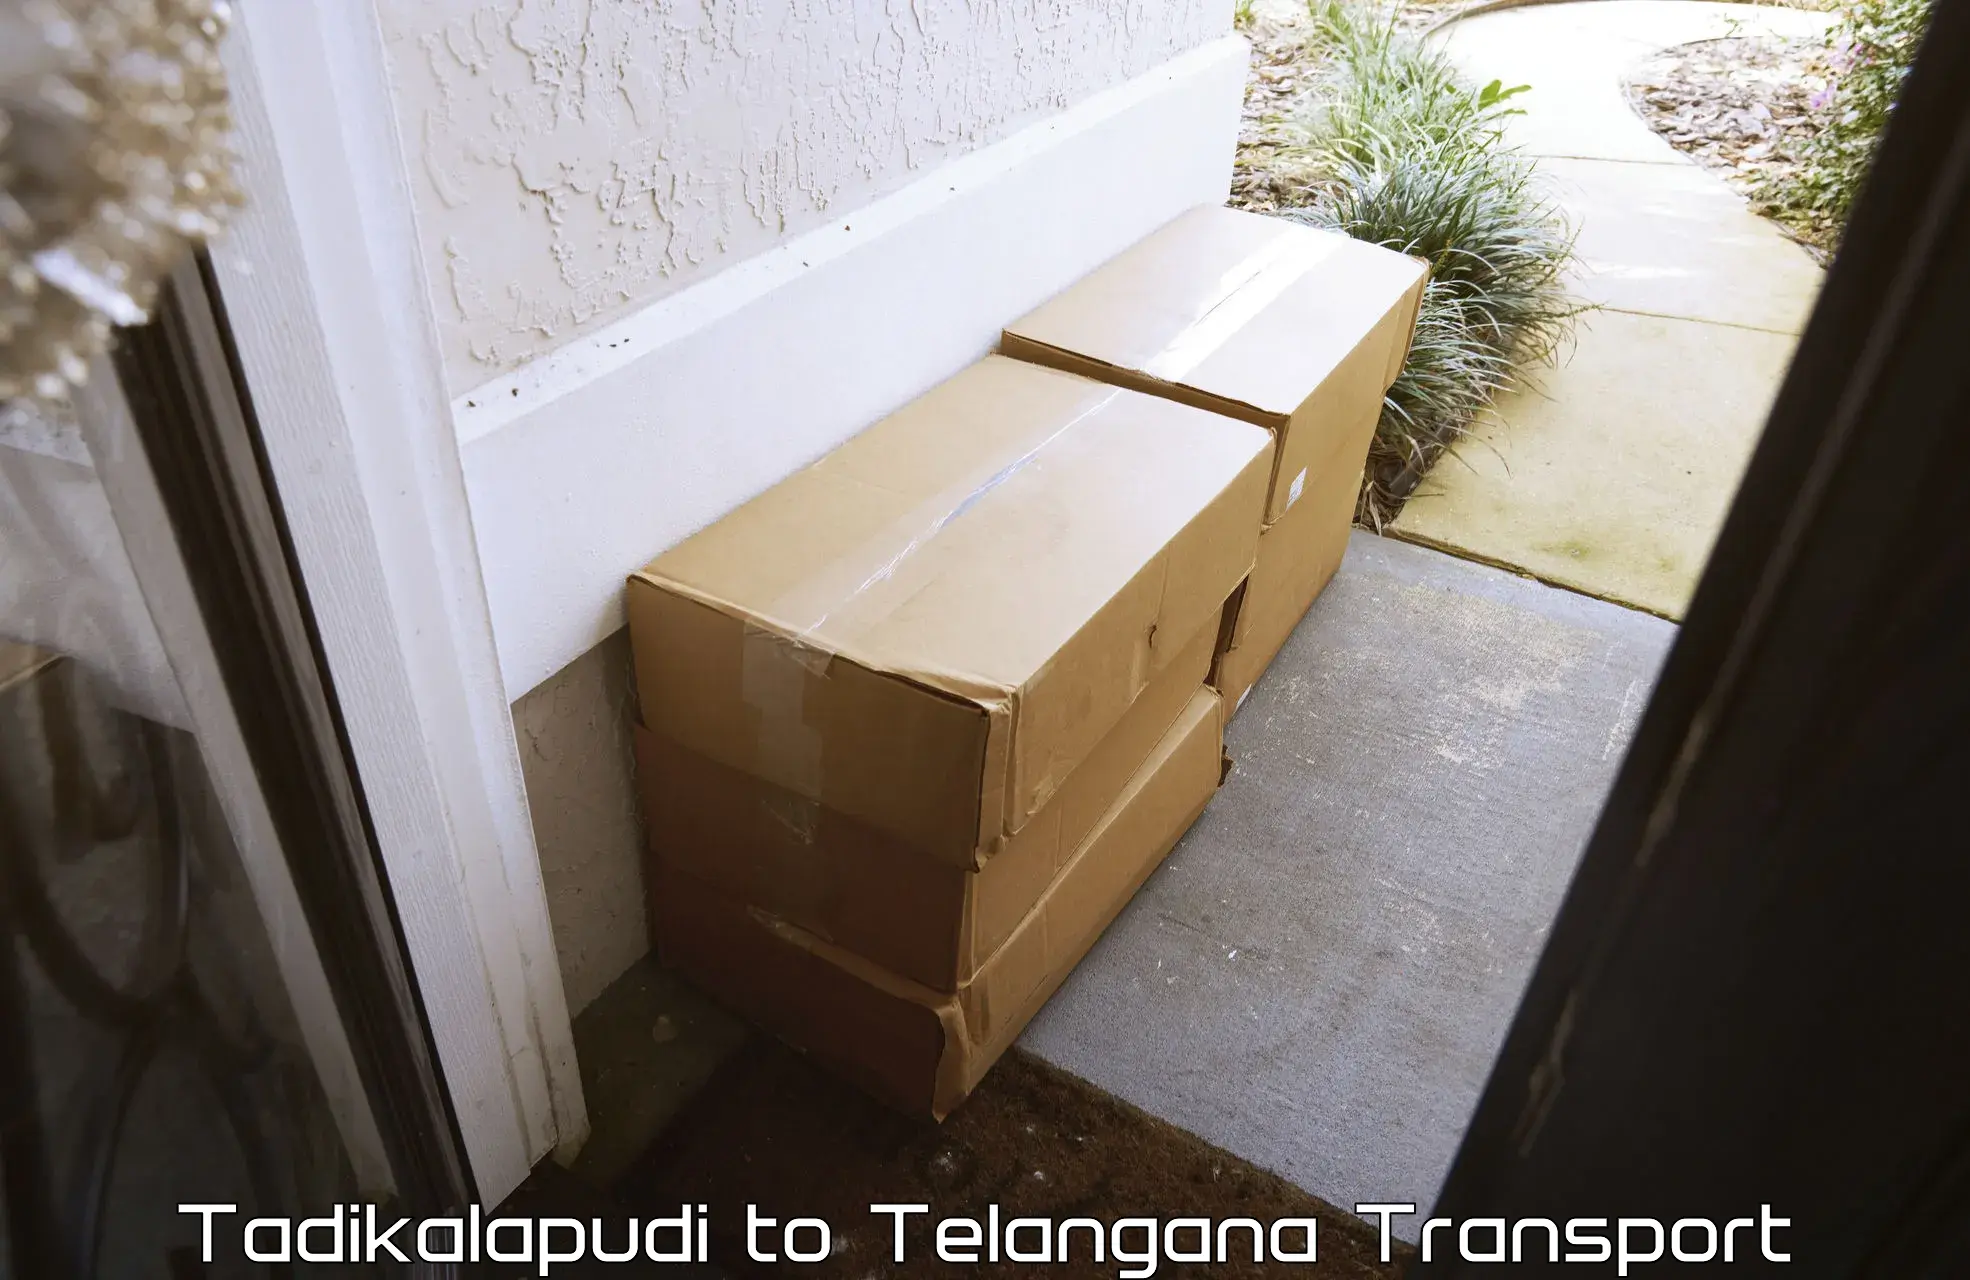 Container transport service Tadikalapudi to Cheyyur